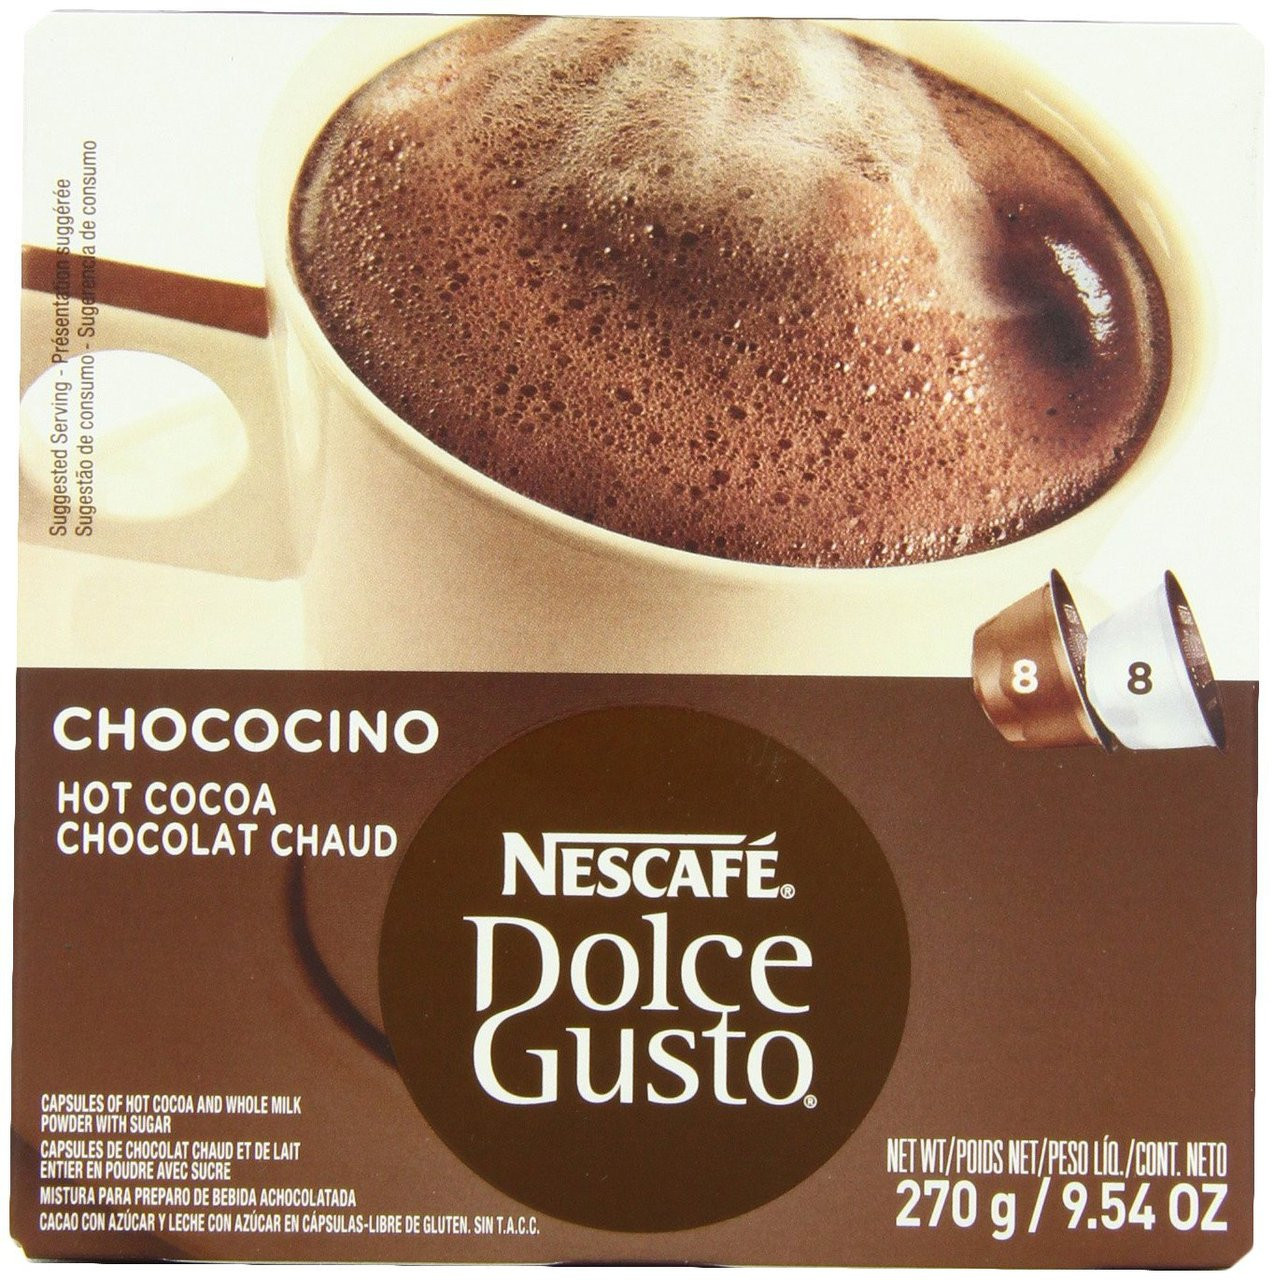 Nescafe Dolce Gusto CHOCOCINO 16 Hot Chocolate Pods 